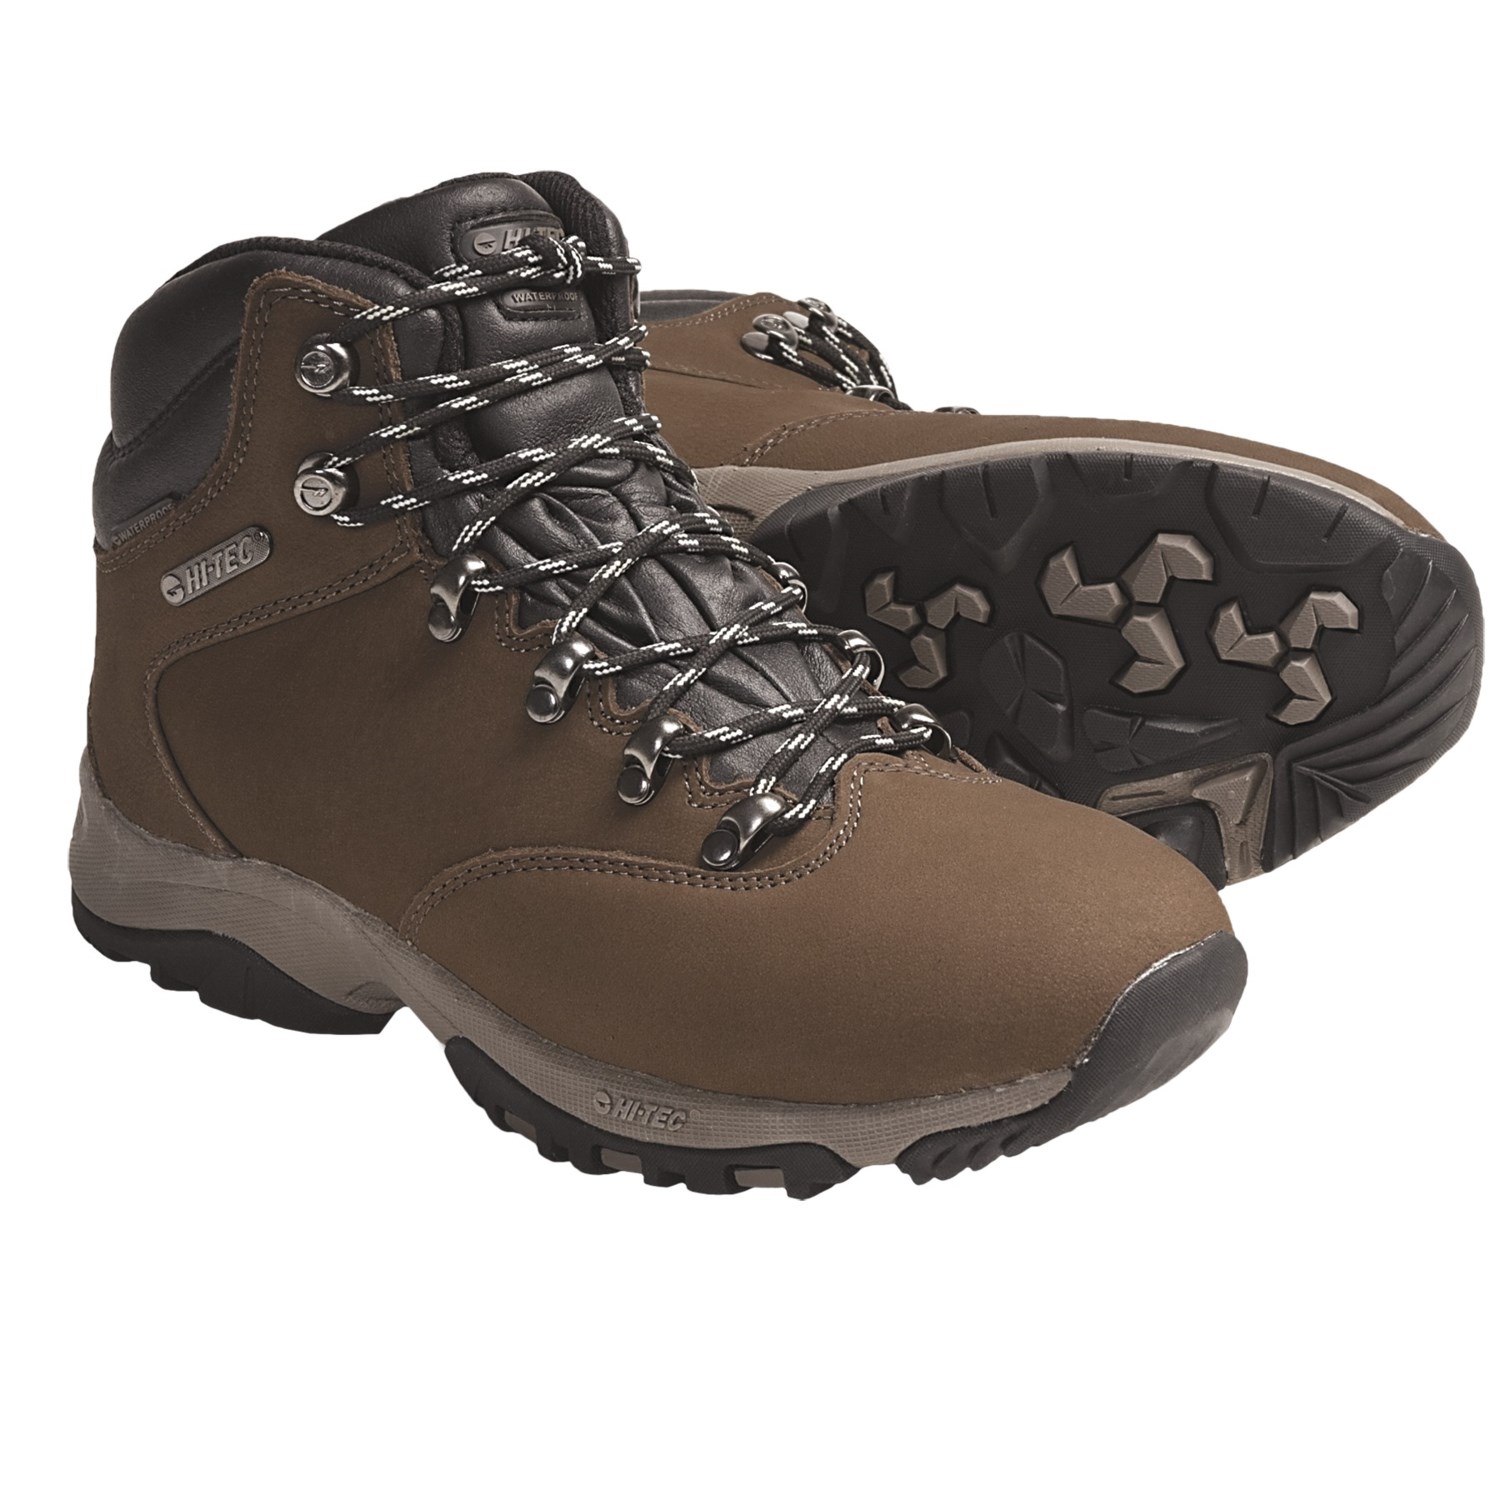 Hi-Tec Altitude Glide Hiking Boots (For Women) 5187H - Save 33%